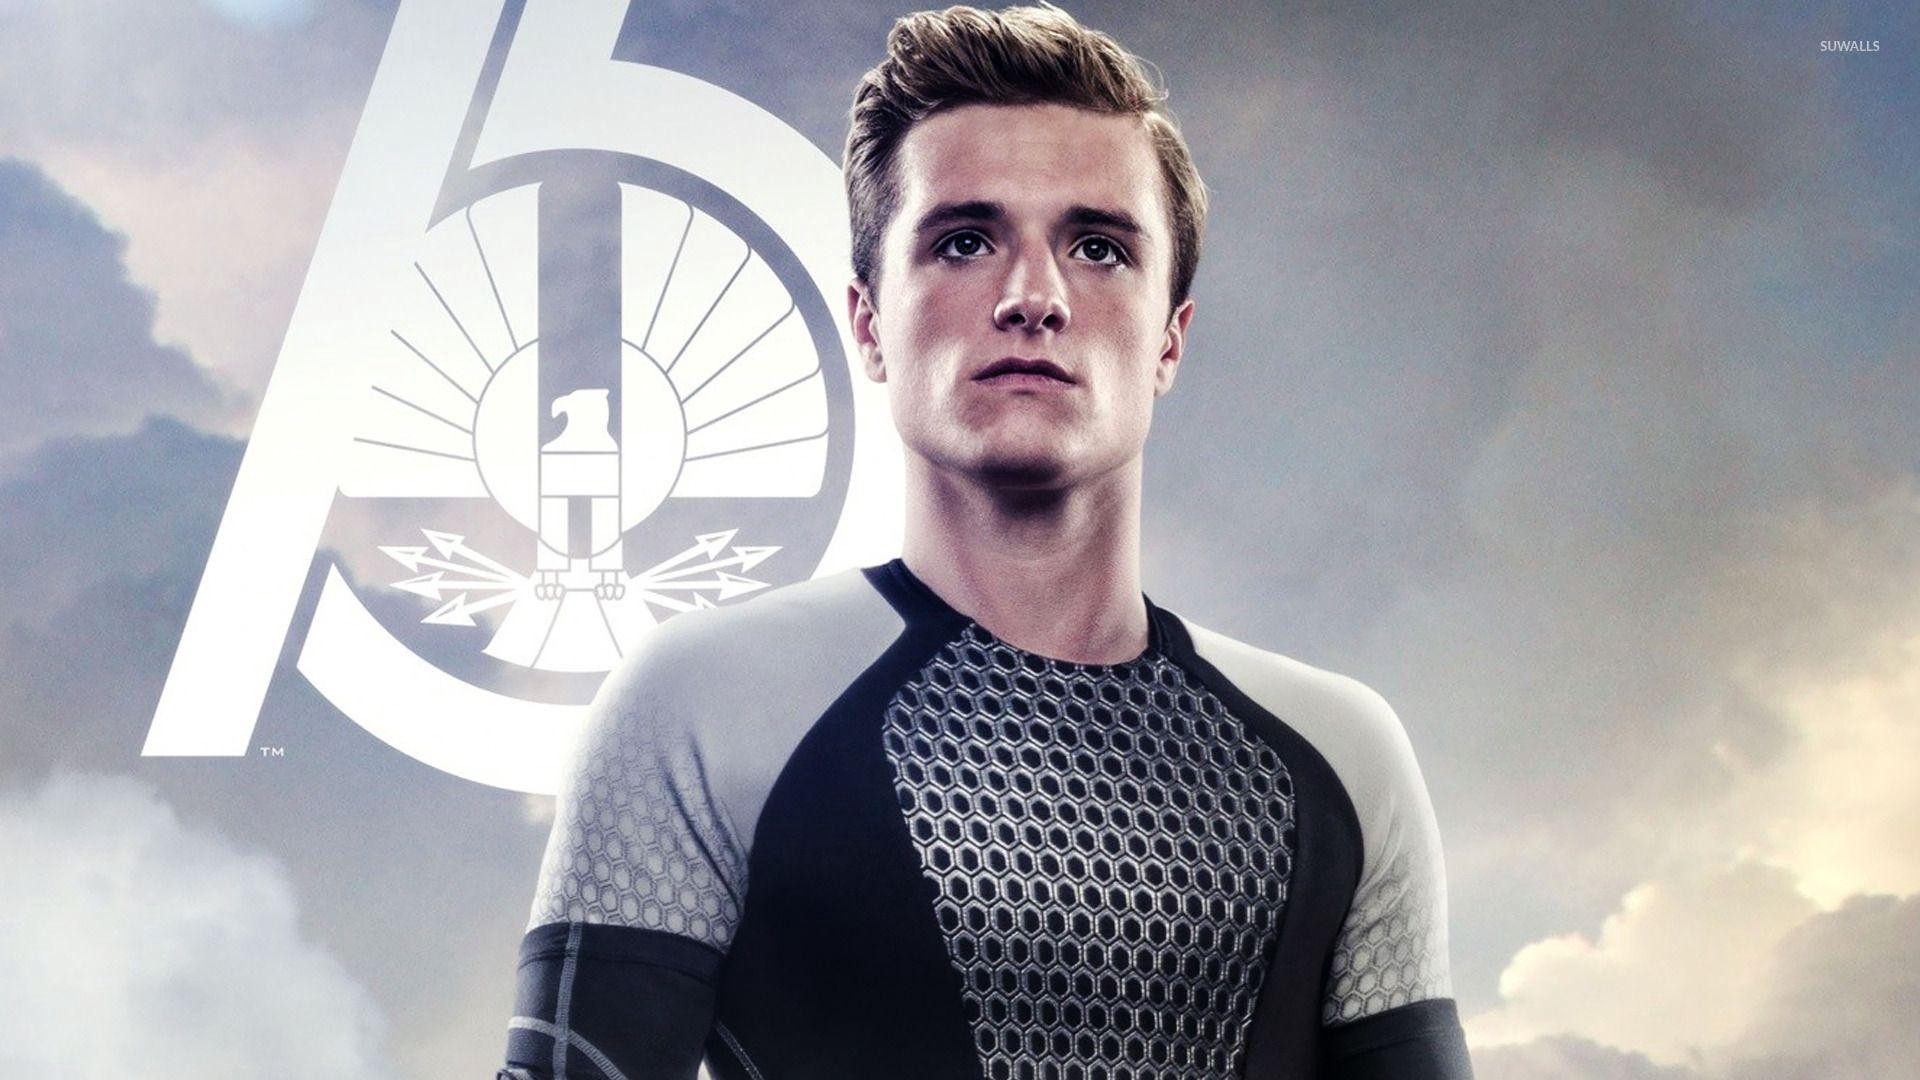 Peeta Mellark, a baker's son from District 12, is the deuteragonist of the The Hunger Games trilogy.